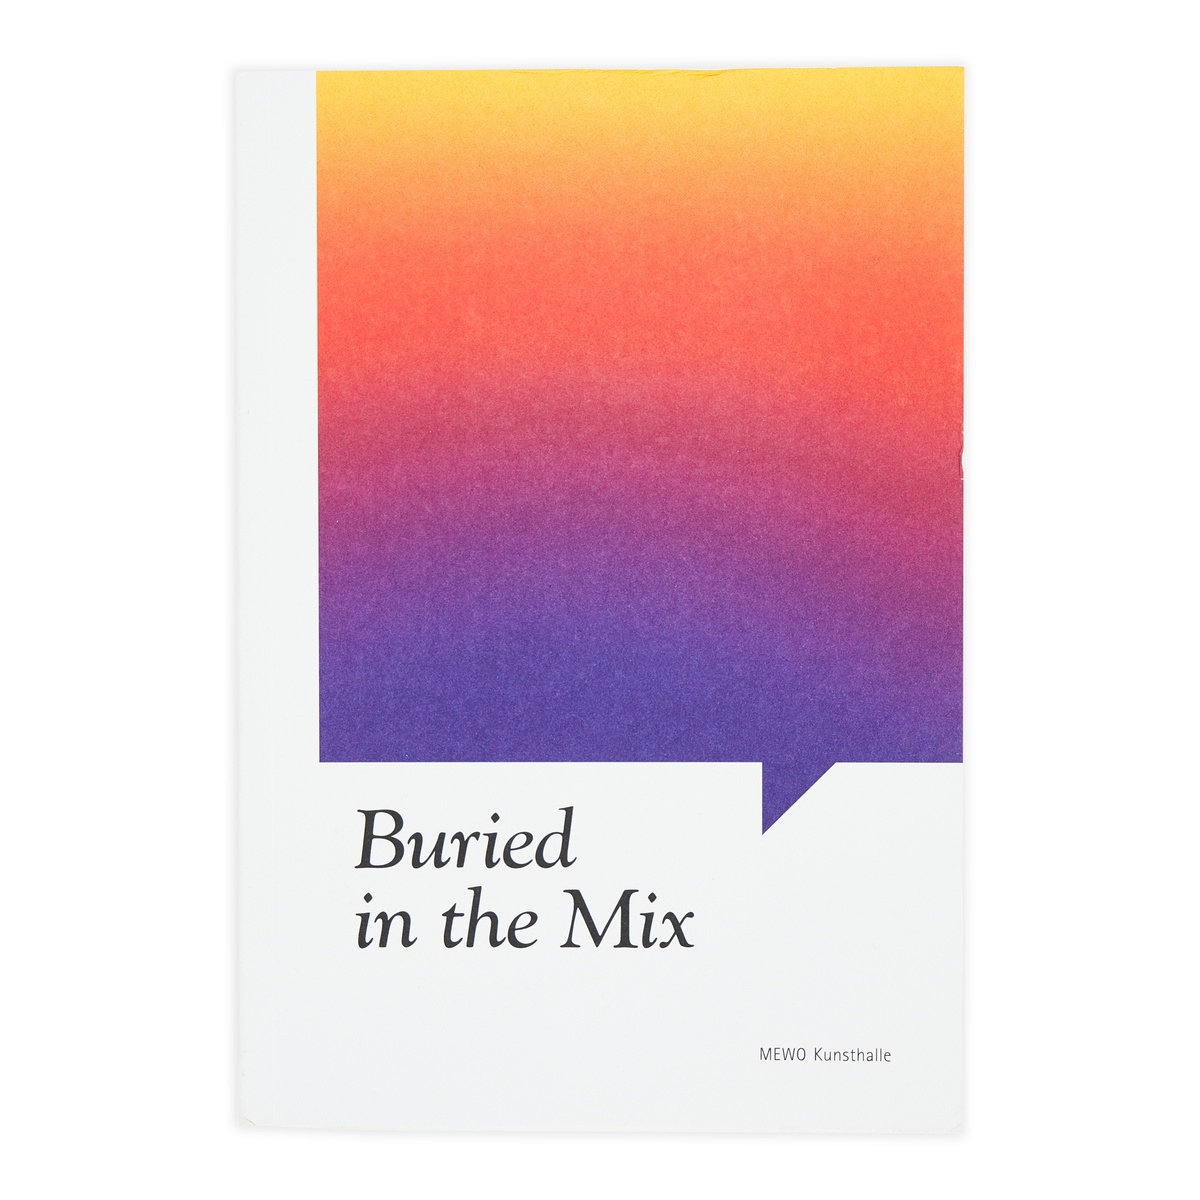 Photograph of the cover of Bhavisha Panchia's edited volume 'Buried in the mix: MEWO Kunsthalle'.
